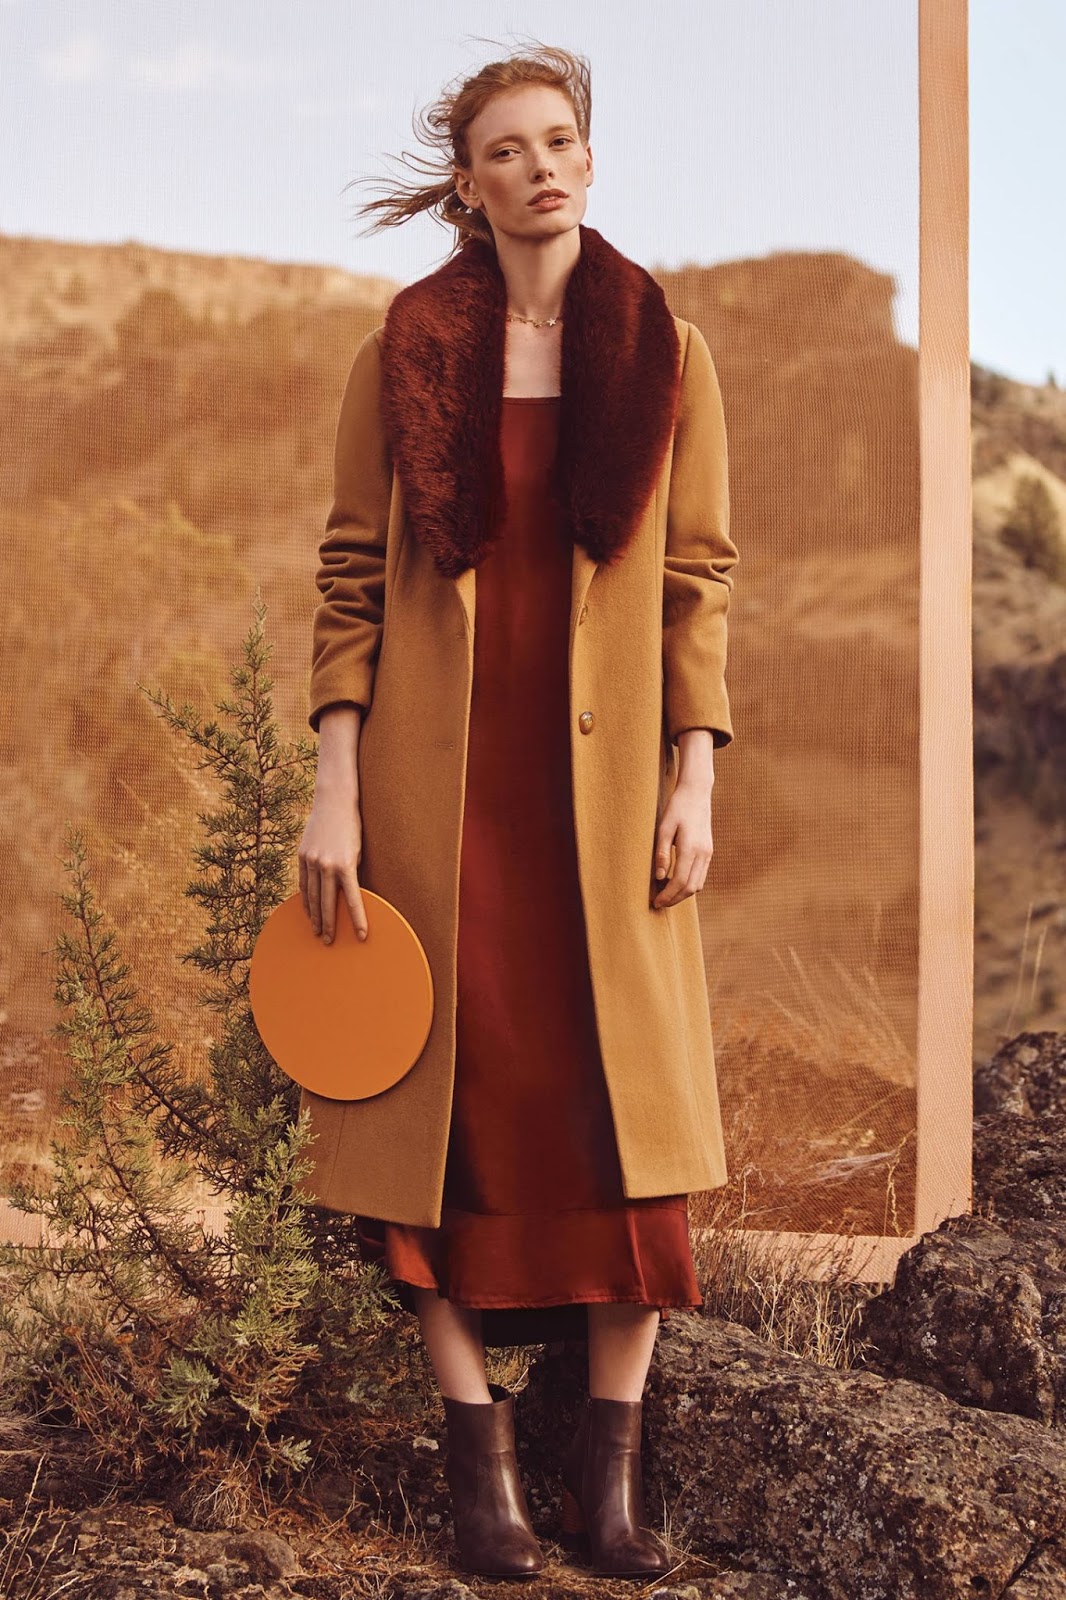 Eye Candy: Anthropologie October 2016 Catalogue